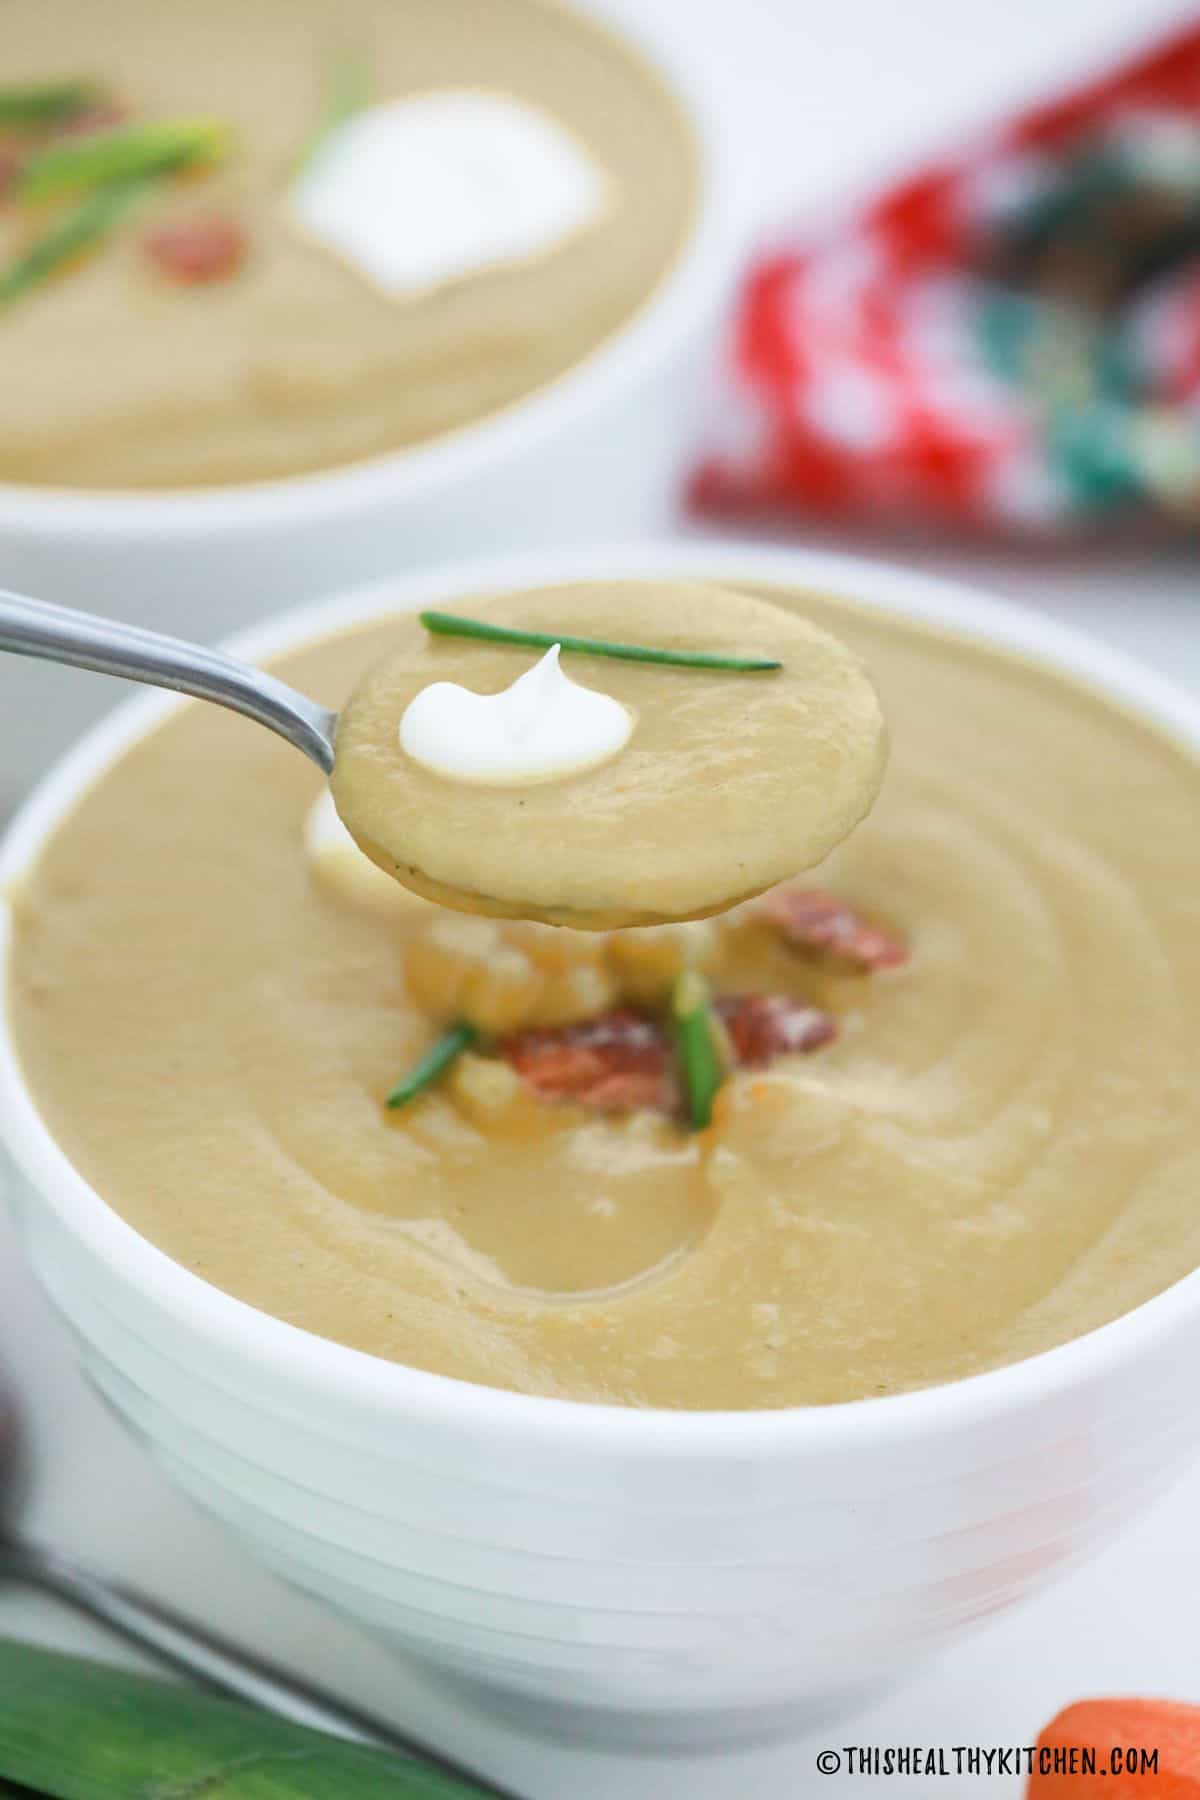 Spoonful of creamy soup being held above bowl of soup.